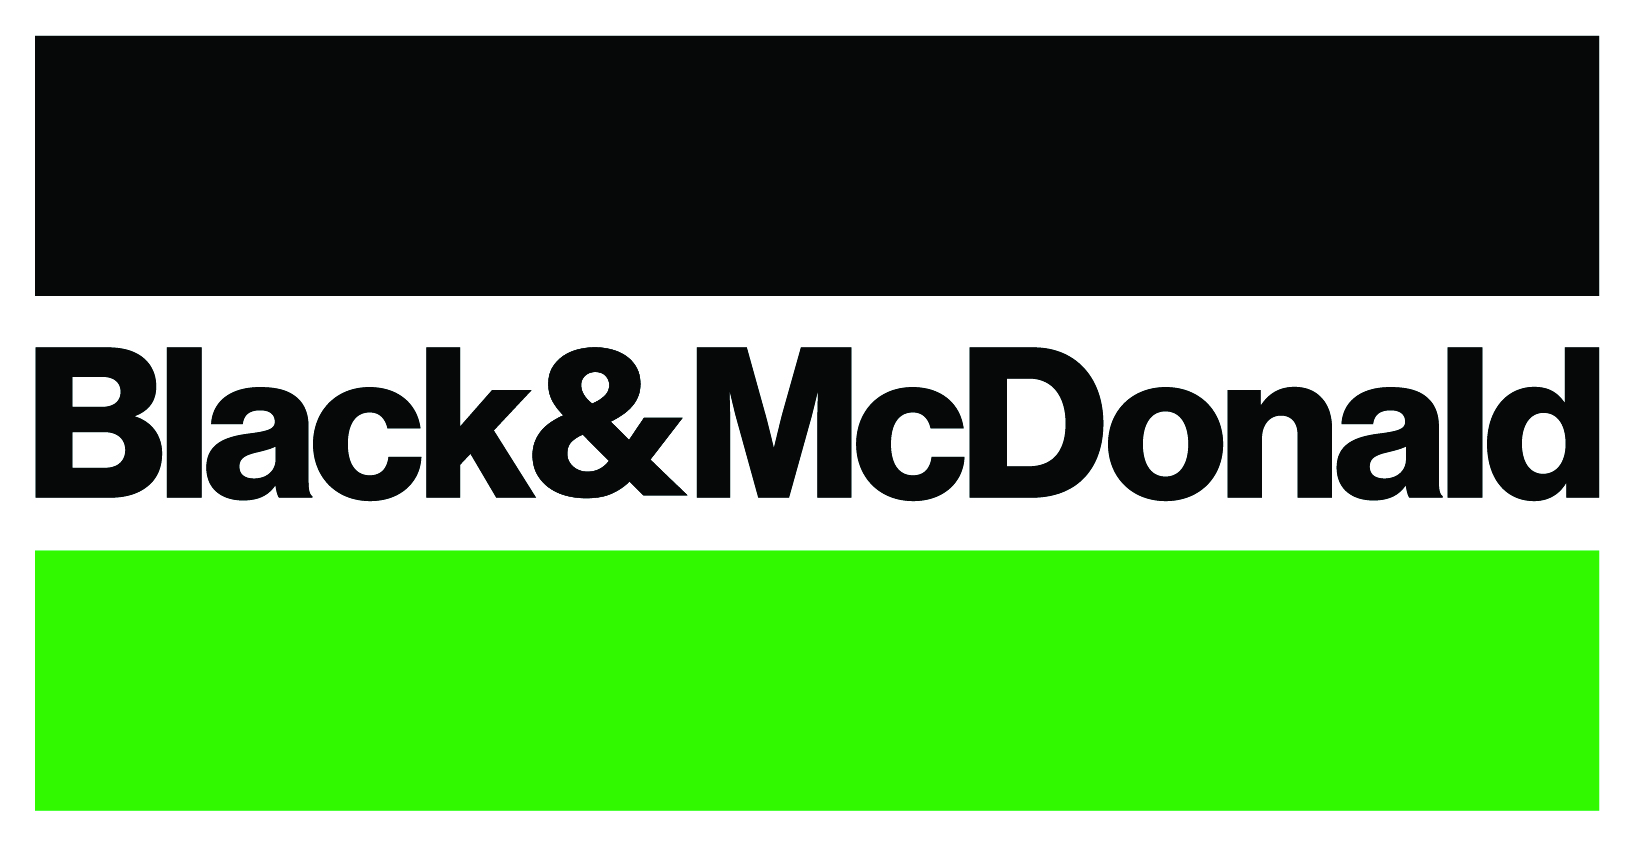 Canadian Business History Association Welcomes Black & McDonald as its Newest Charter Corporate Member